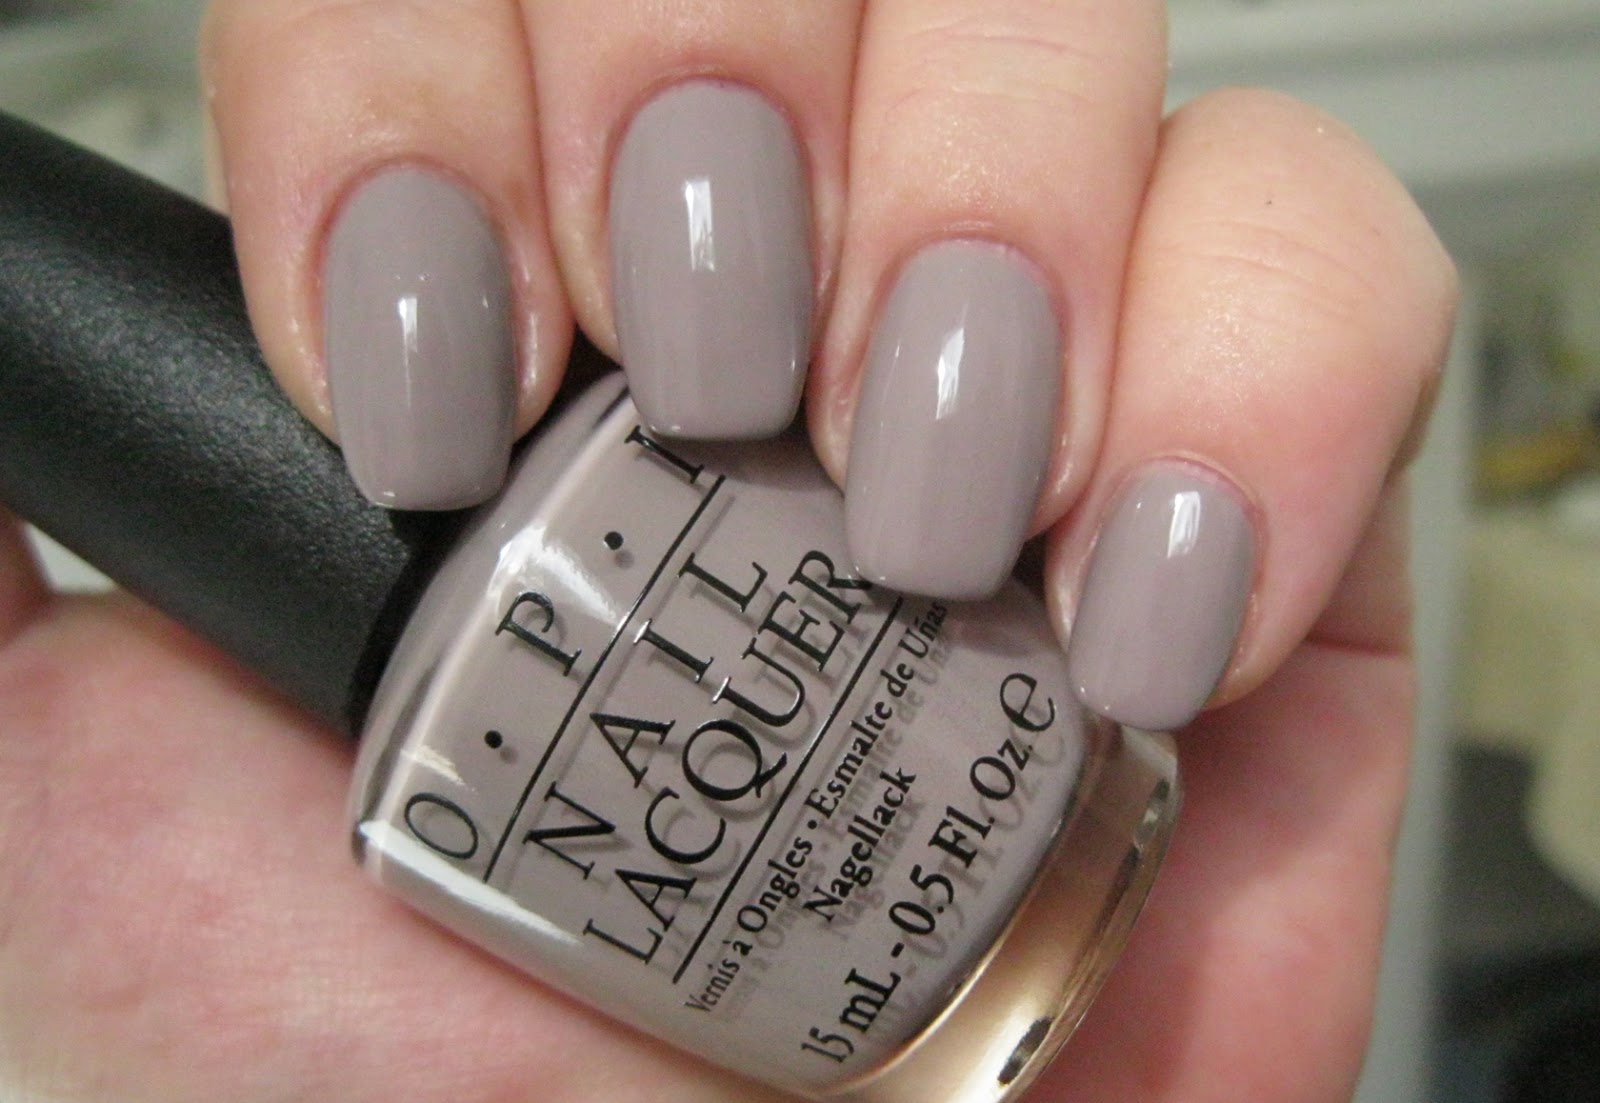 7. OPI Nail Lacquer in "Taupe-less Beach" - wide 7